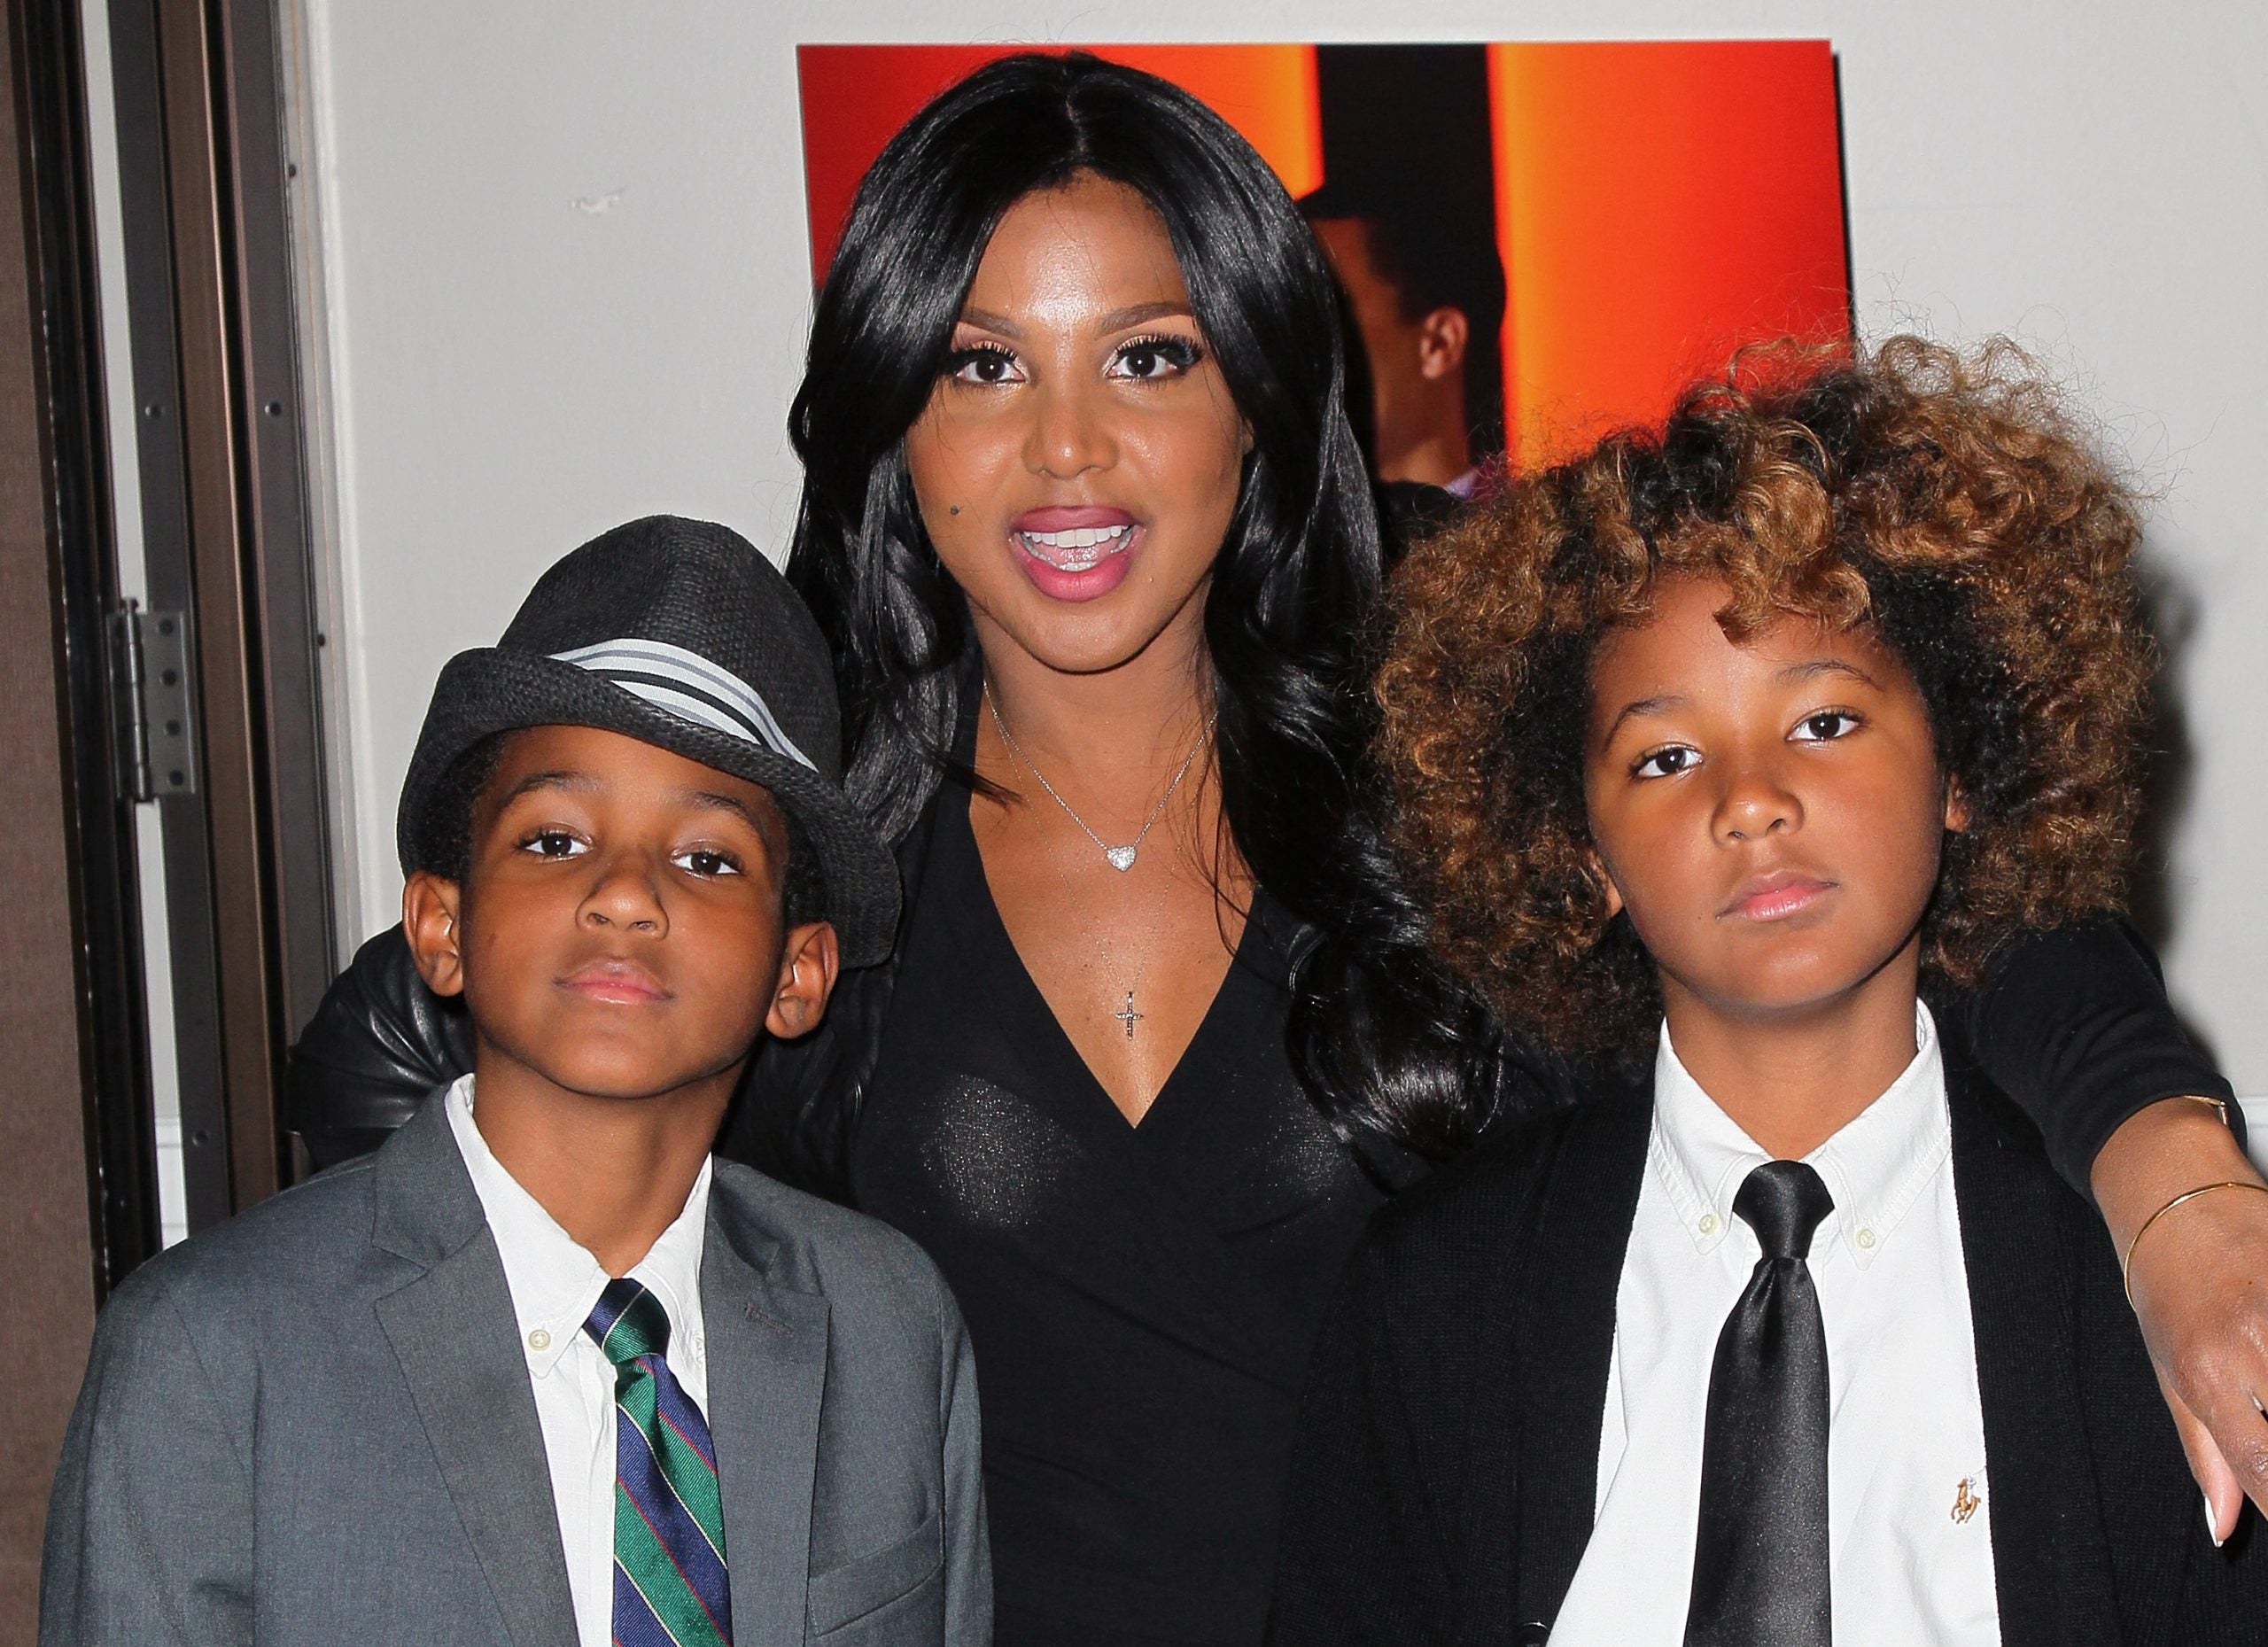 Toni Braxton's Son Diezel Is Headed To Howard University And We Feel Old